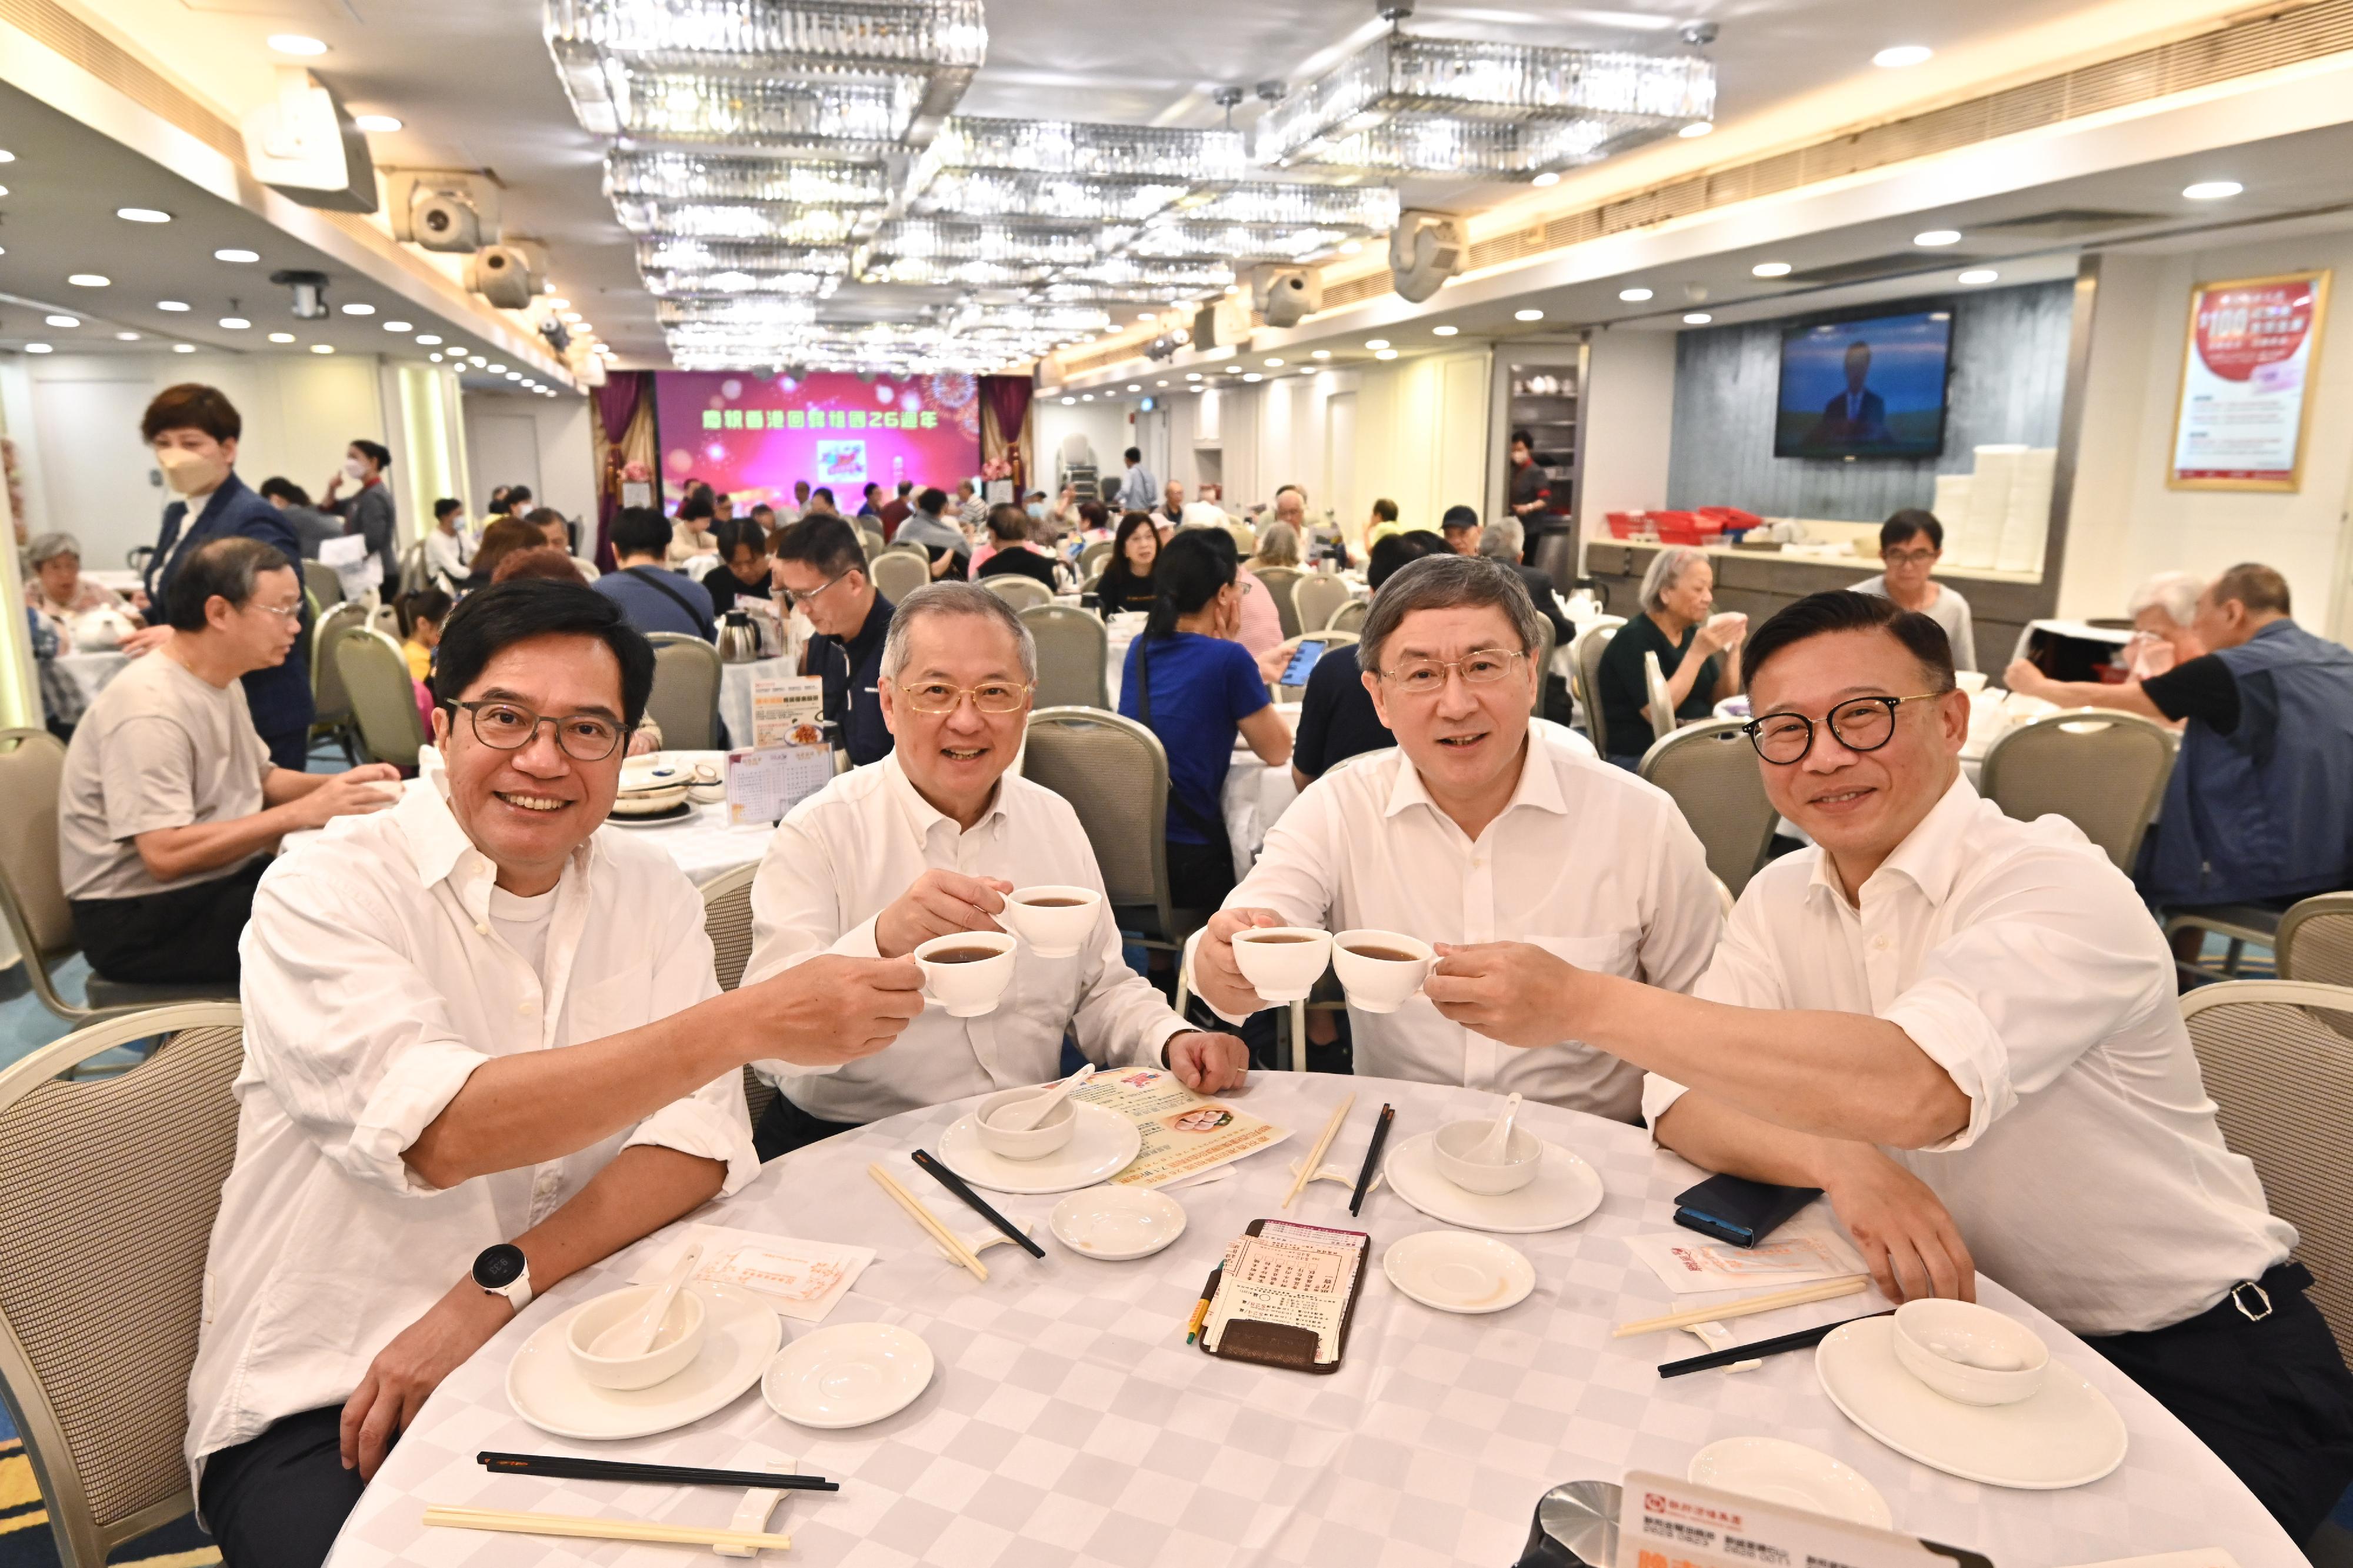 The Deputy Chief Secretary for Administration, Mr Cheuk Wing-hing (second right); the Deputy Financial Secretary, Mr Michael Wong (first left); and the Deputy Secretary for Justice, Mr Cheung Kwok-kwan (first right), enjoy July 1 dining discounts at a North Point restaurant  today (July 1) together with the Legislative Council Member (Catering), Mr Tommy Cheung (second left), to celebrate Hong Kong's return to the motherland.